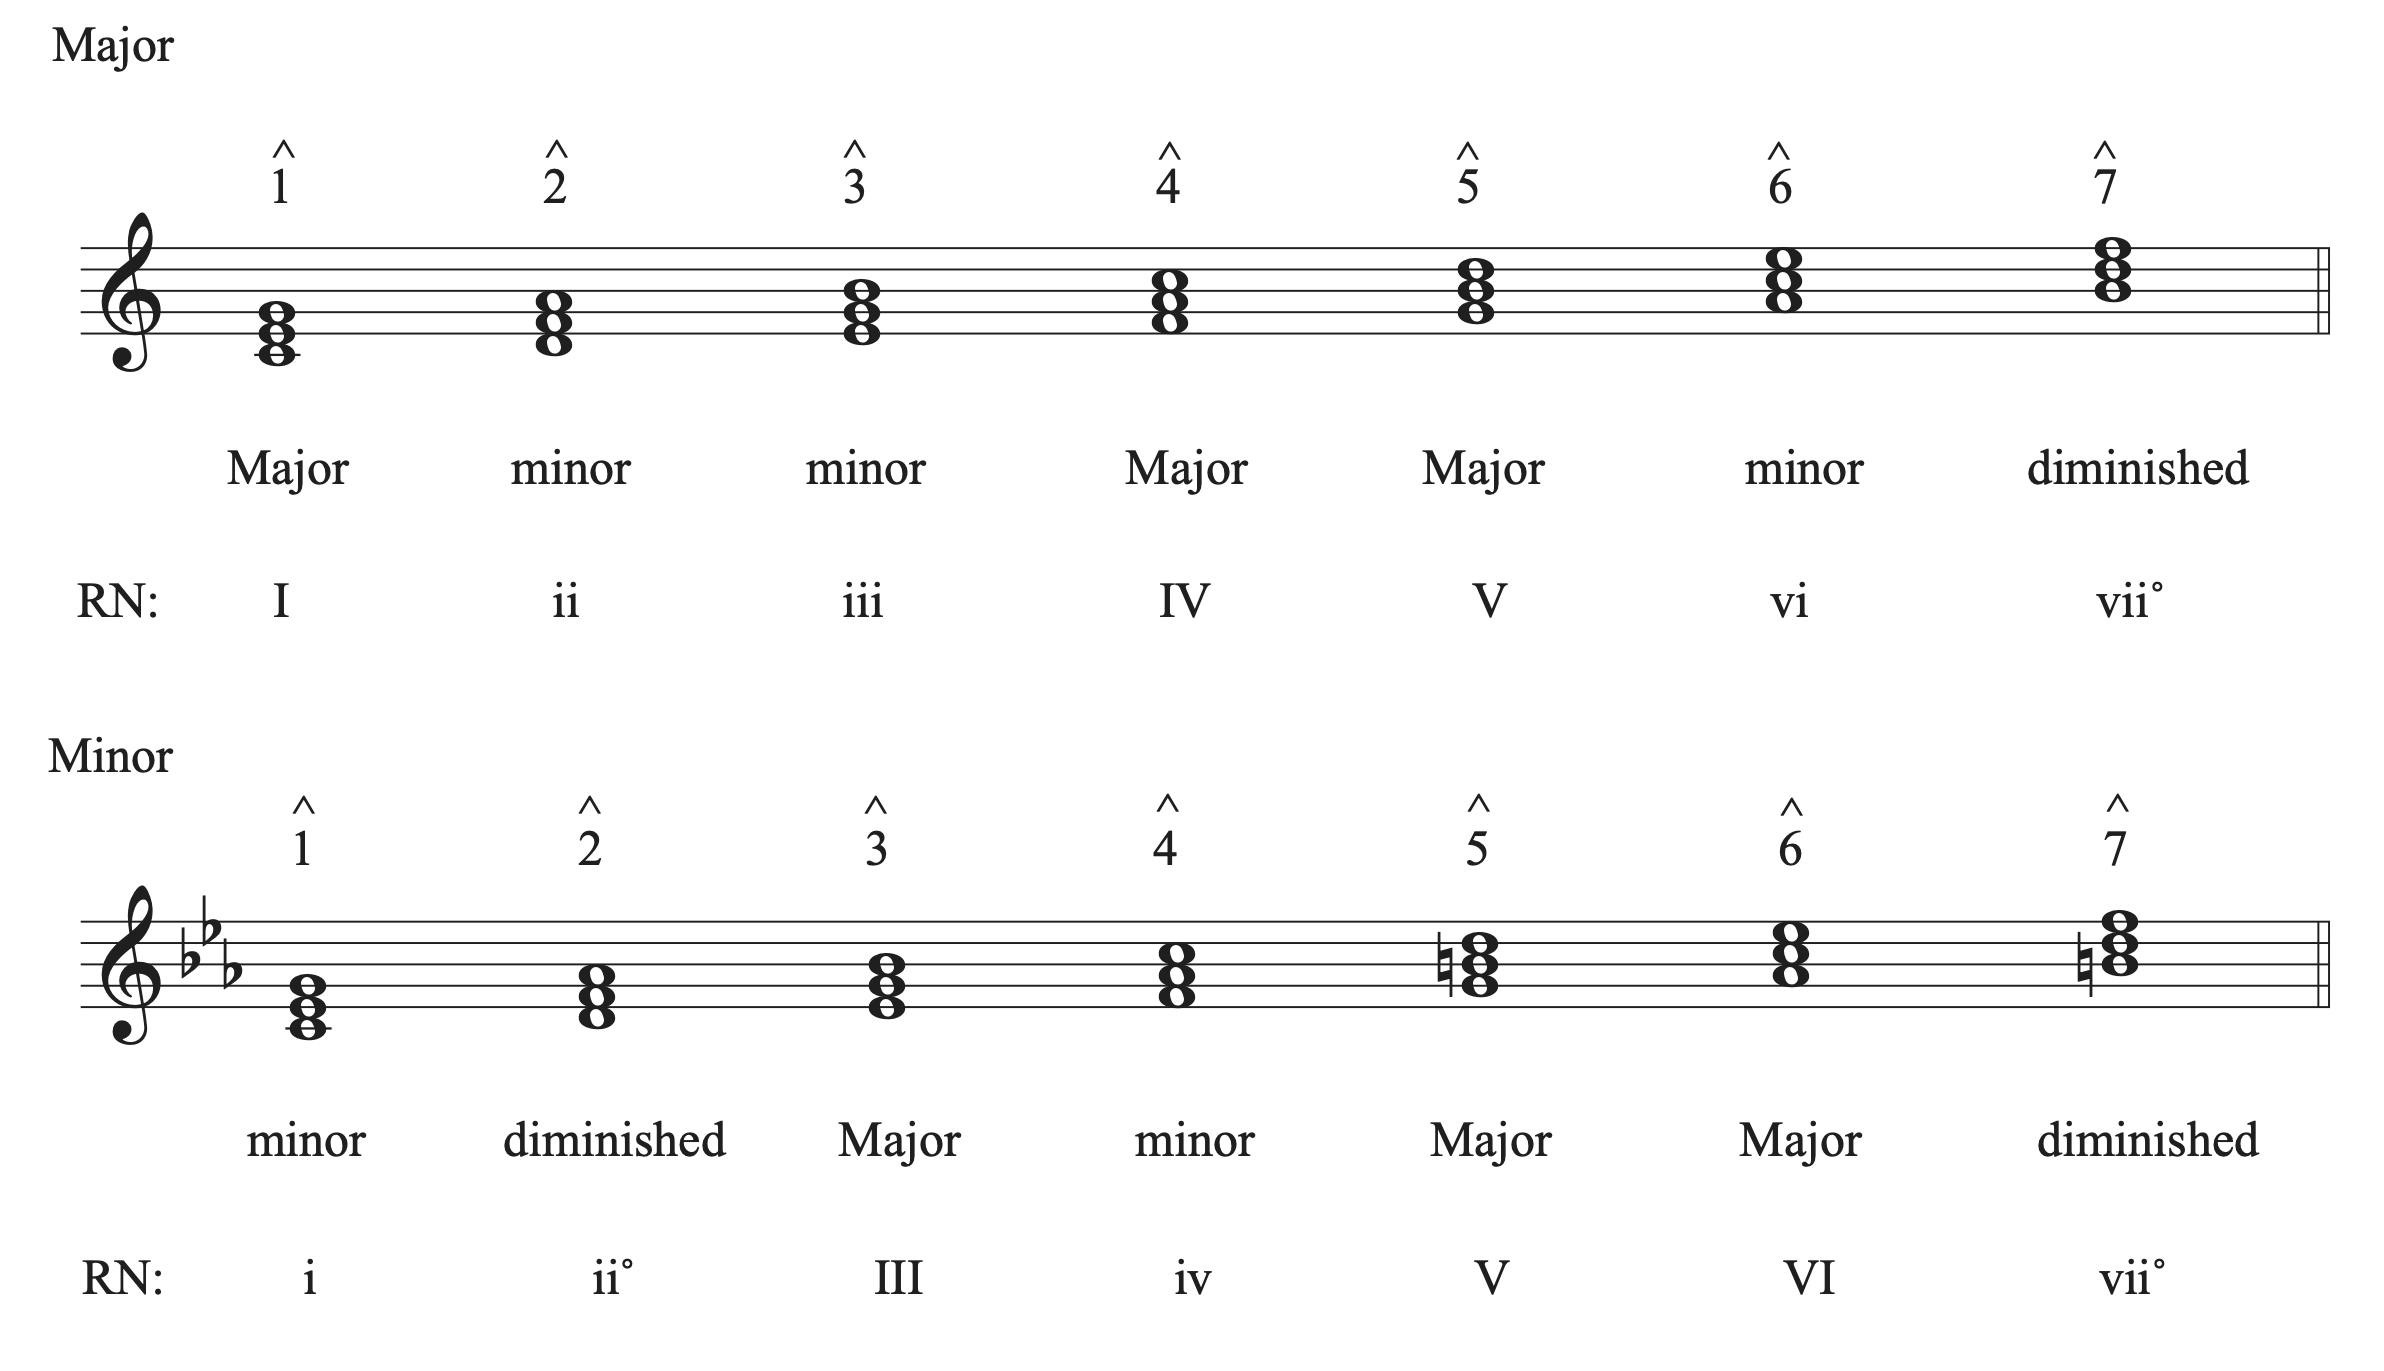 Chart showing the Roman Numerals used to label triads built on each scale degree of a major and minor key.